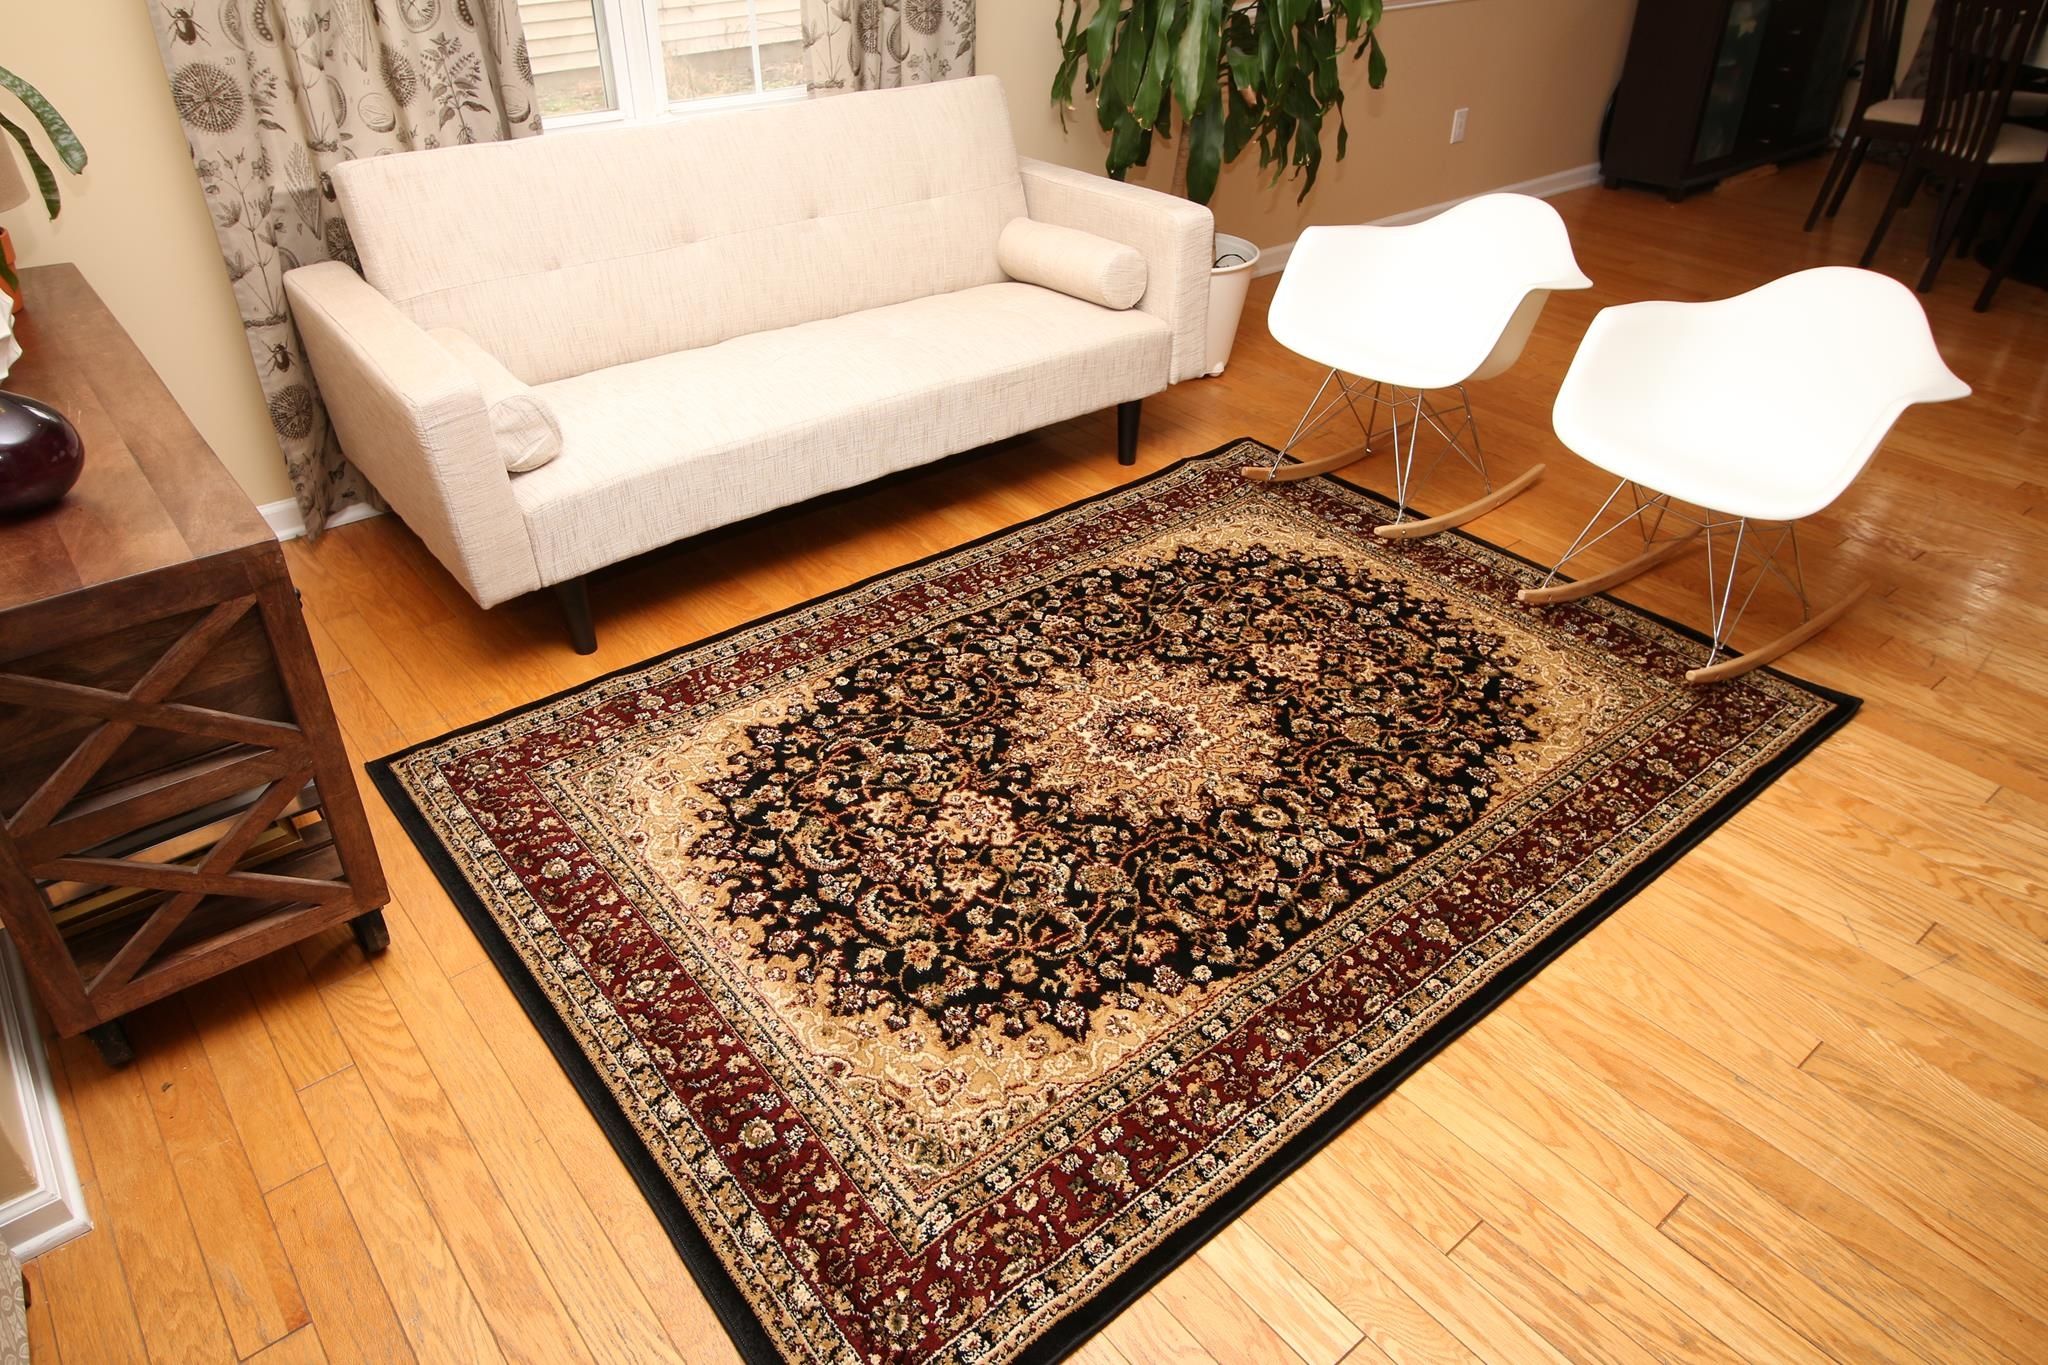 Cheap Area Rugs Persian Rugs Contemporary Rugs Superior Rugs Pertaining To Wool Area Rugs 4× (View 10 of 15)